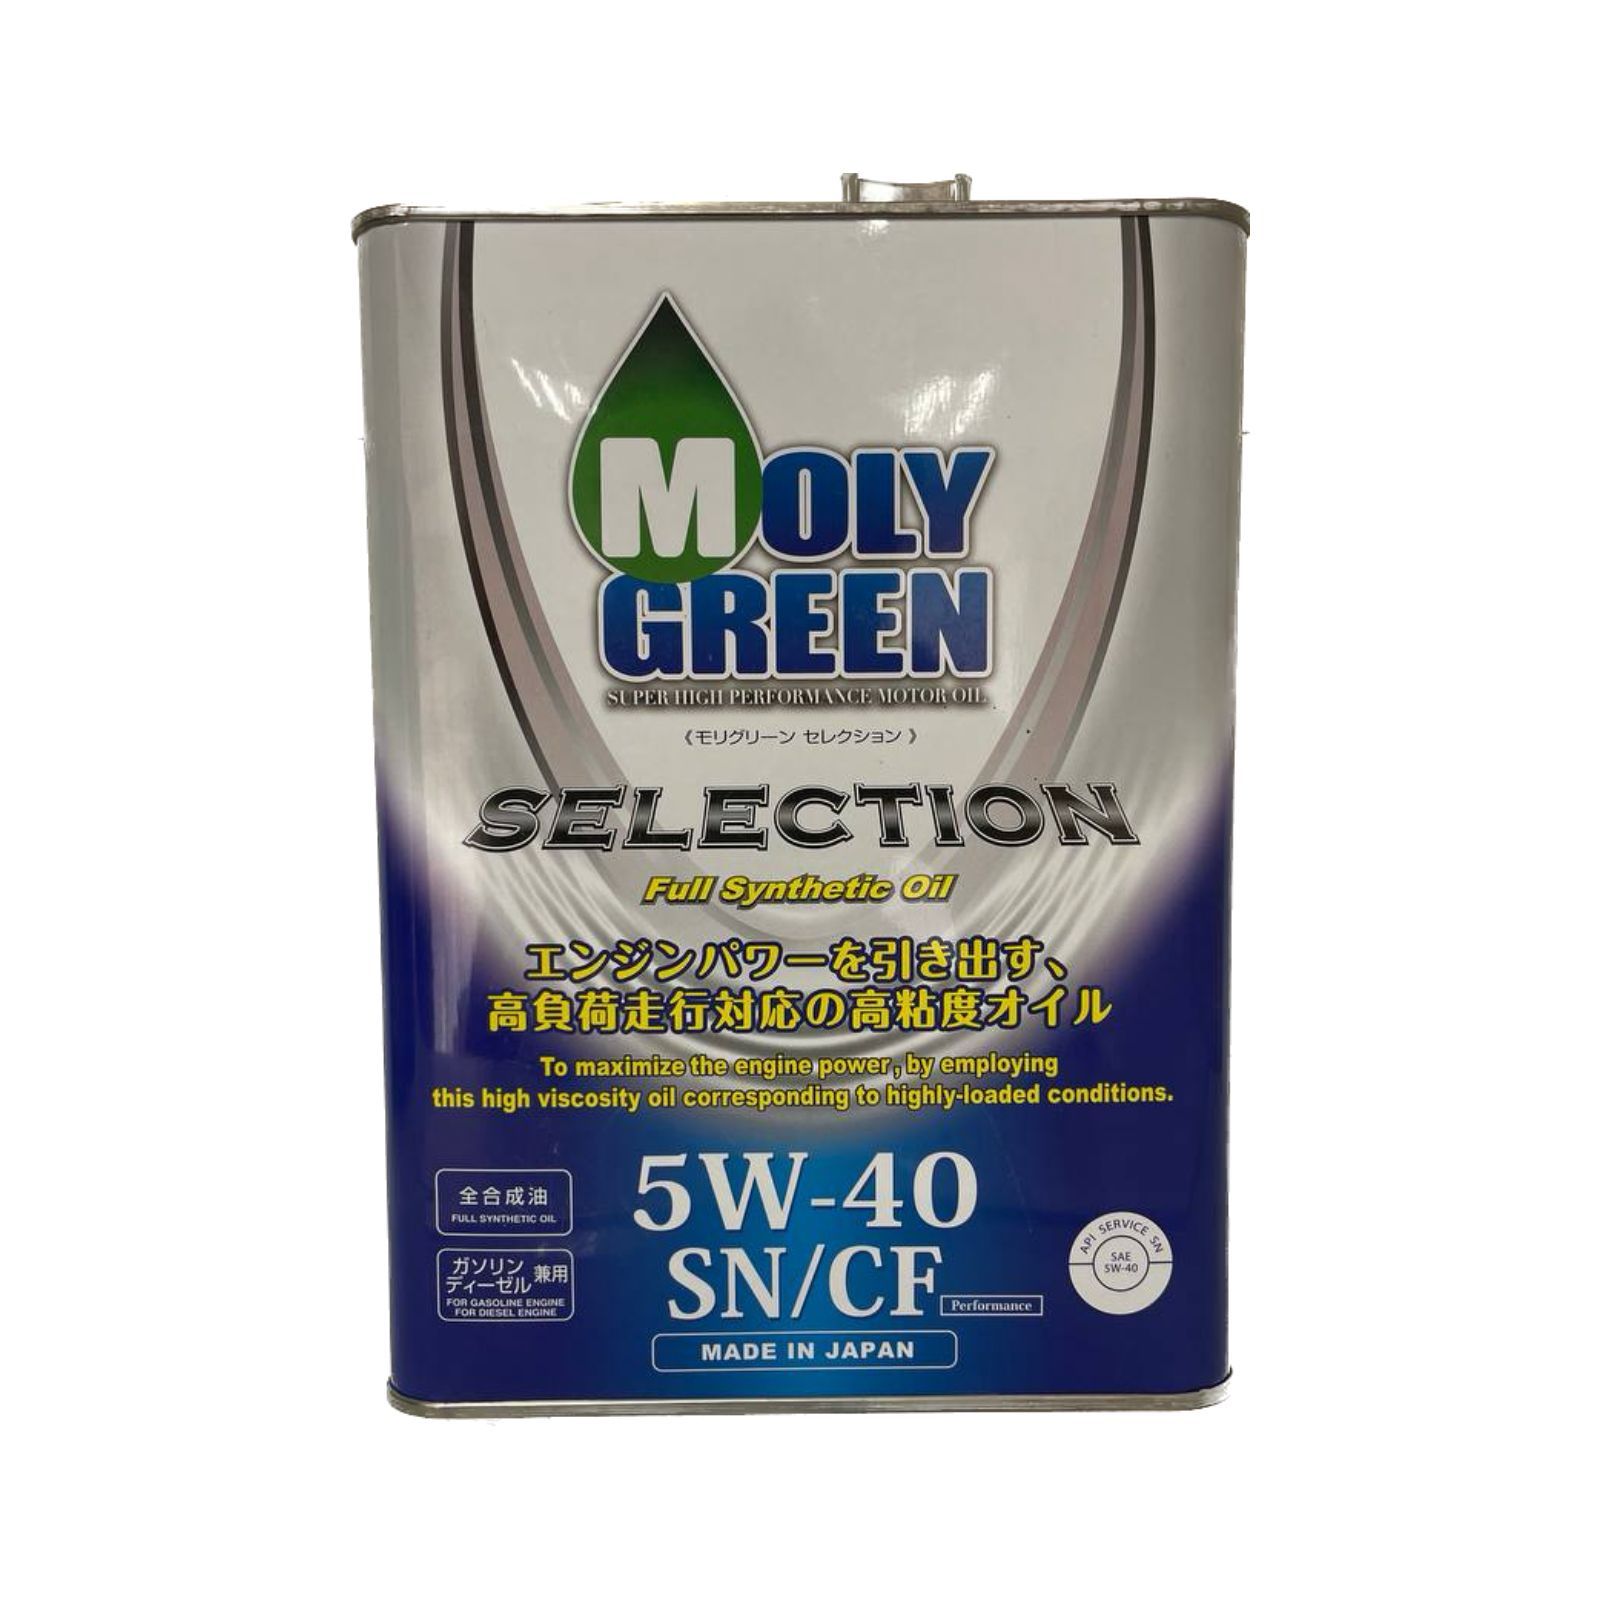 Moly green 5w40. Масло Moly Green 5w40. Moly Green selection 5w40 бочка 200. Moly Green ATF допуски. Масло Moly Green крышка.